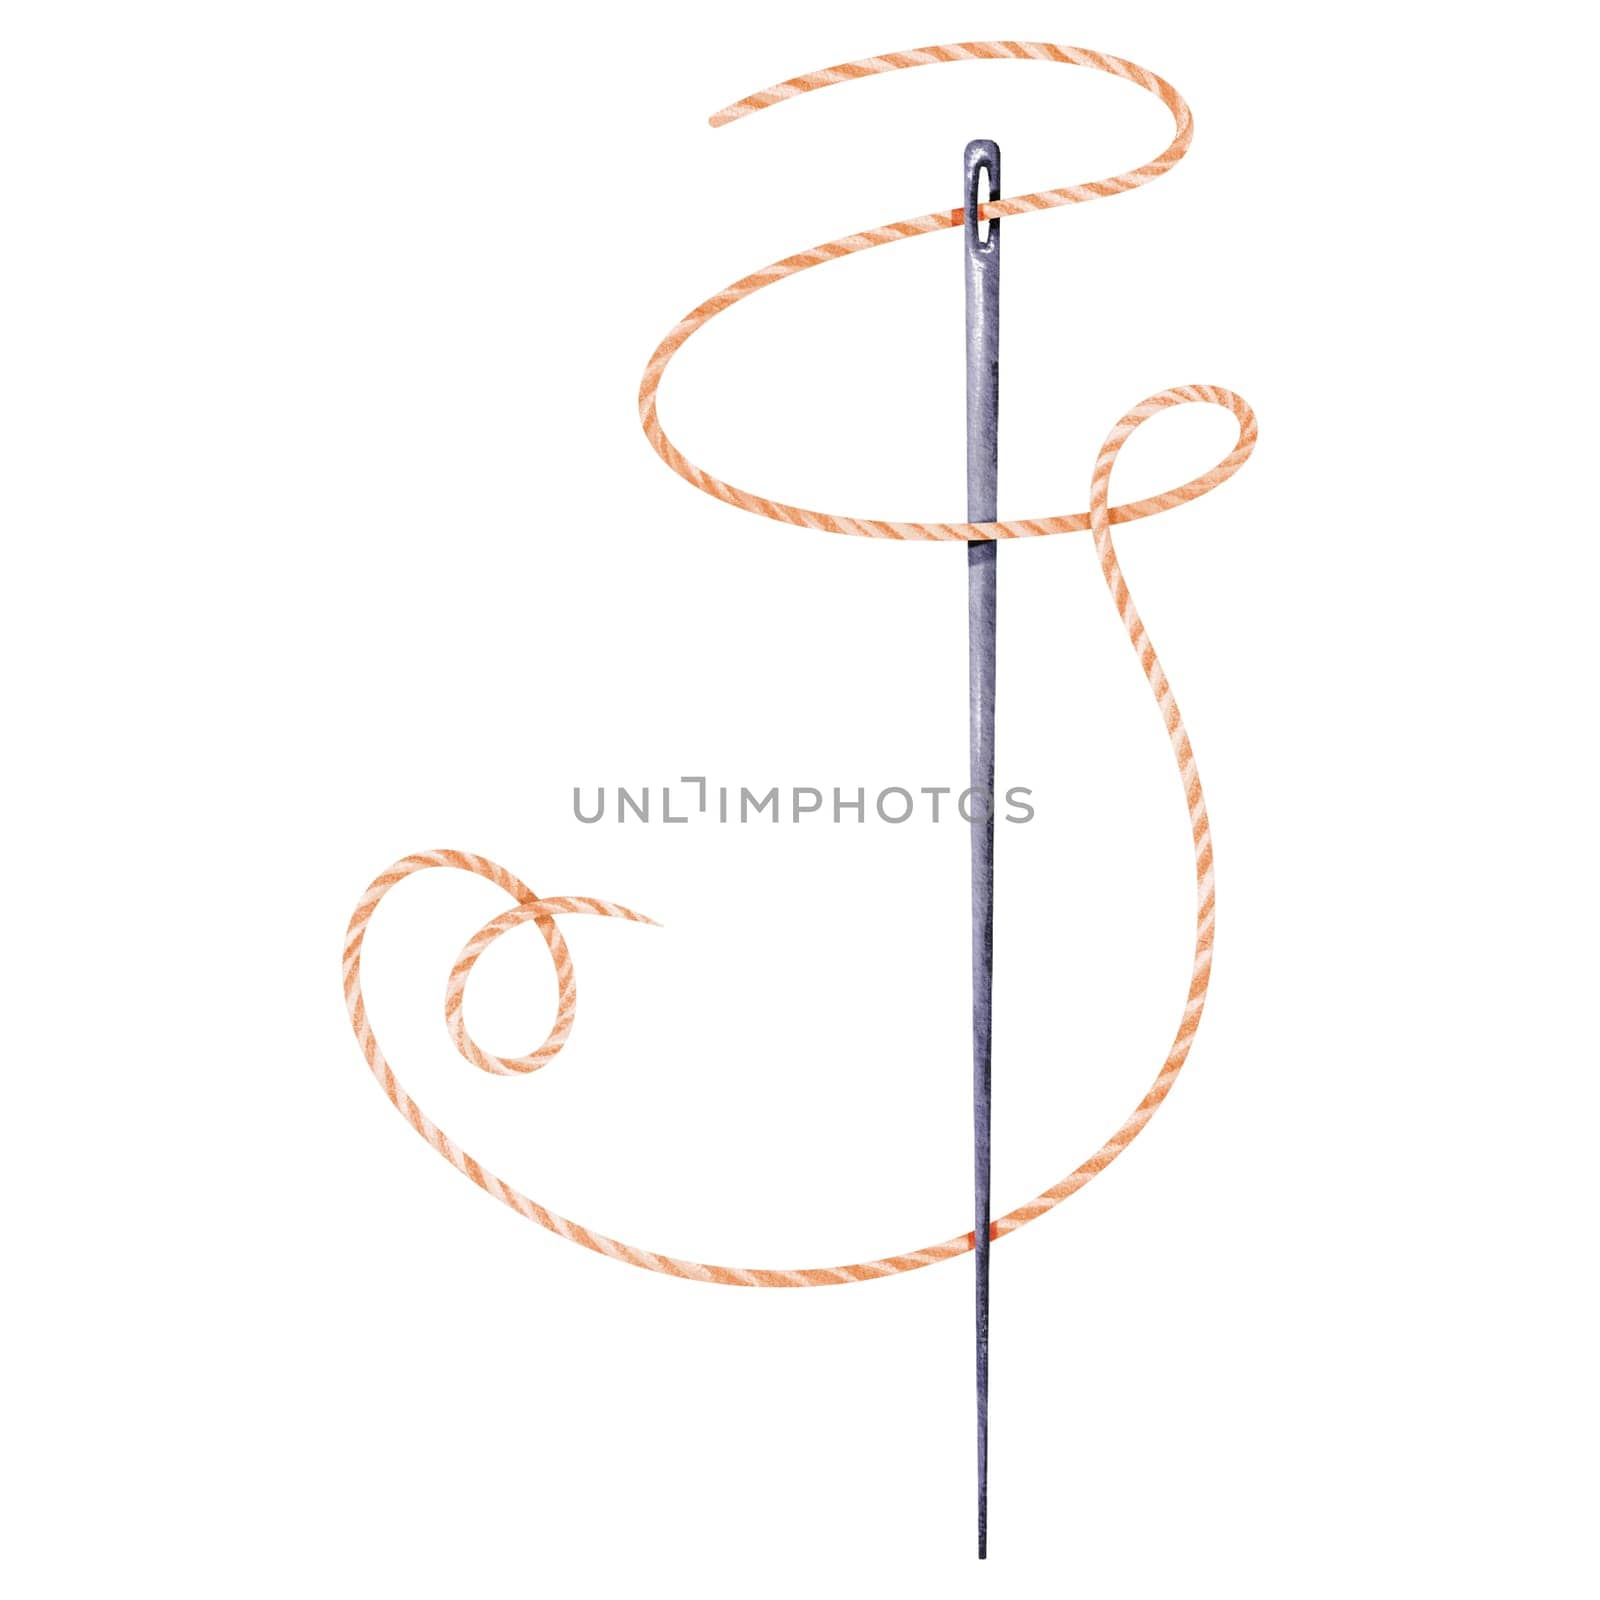 A steel needle with an orange thread. Graceful movement. Isolated object. Watercolor illustration. Ideal for sewing-related logos, crafting enthusiasts, needlework businesses, and DIY-themed designs.